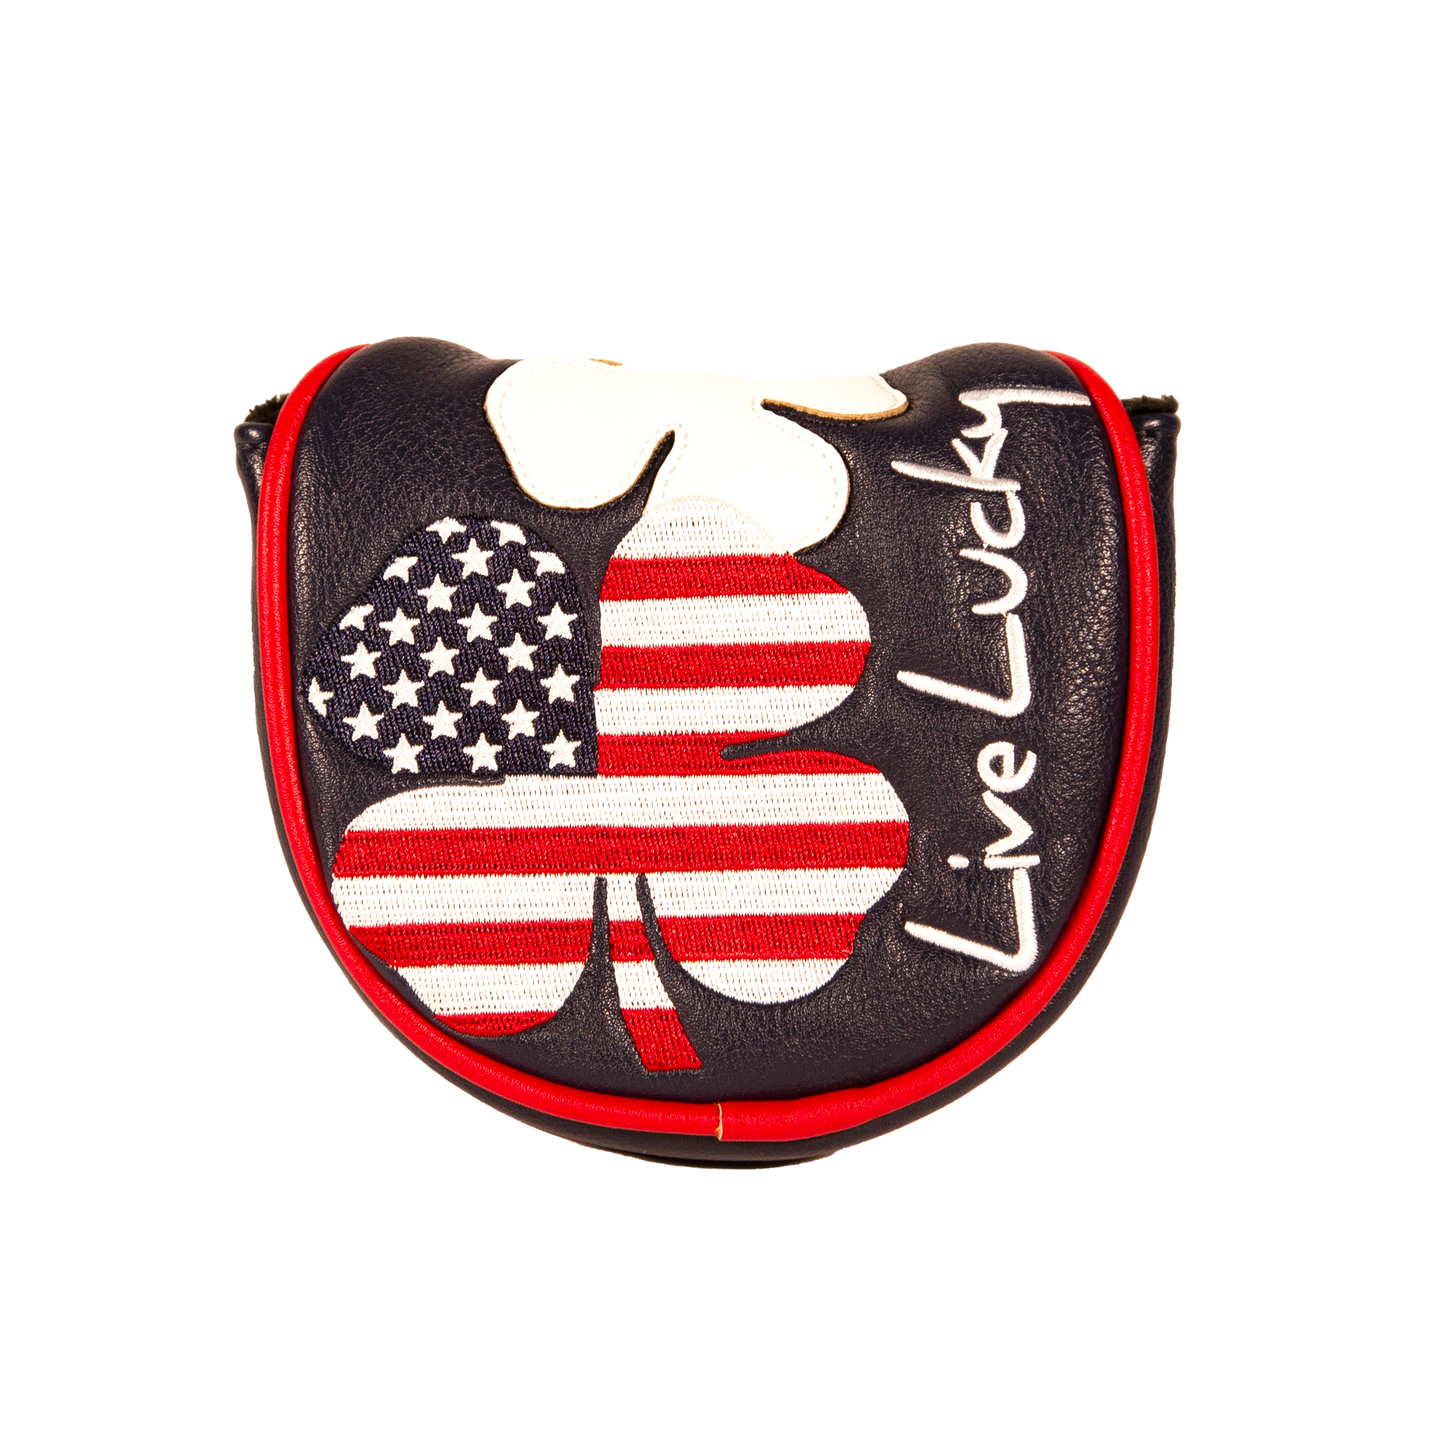 Live Lucky "USA" Mallet Putter Cover